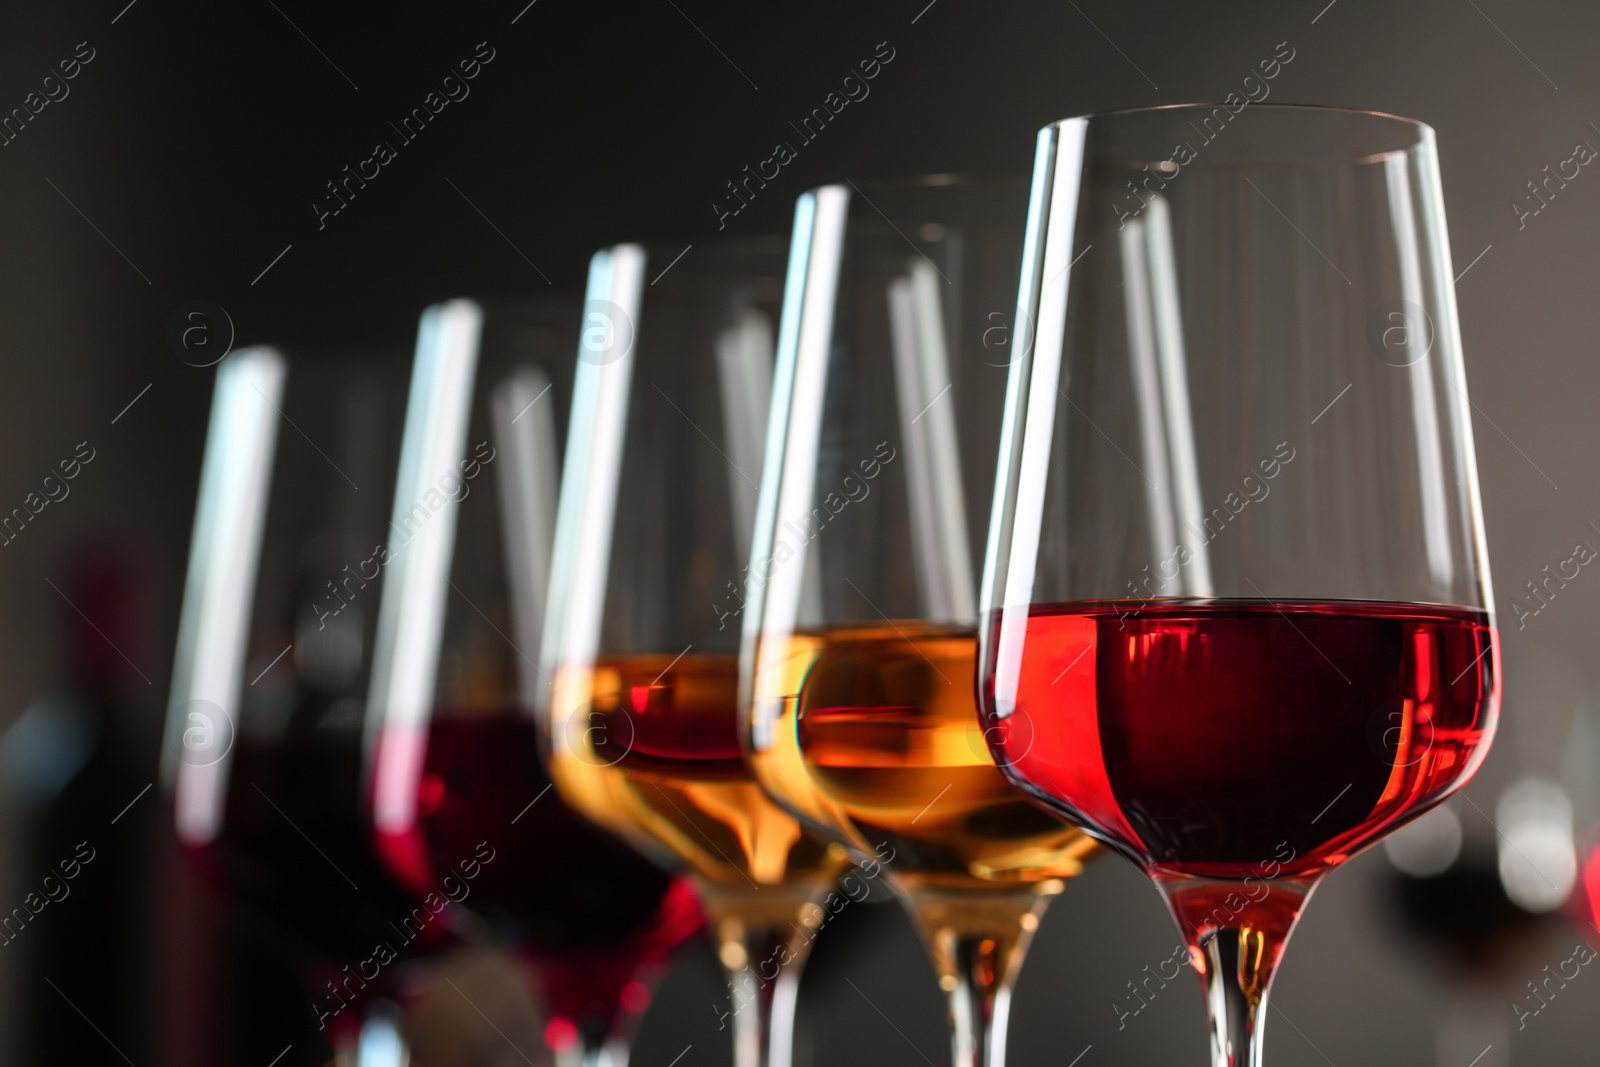 Photo of Row of glasses with different wines against blurred background, closeup